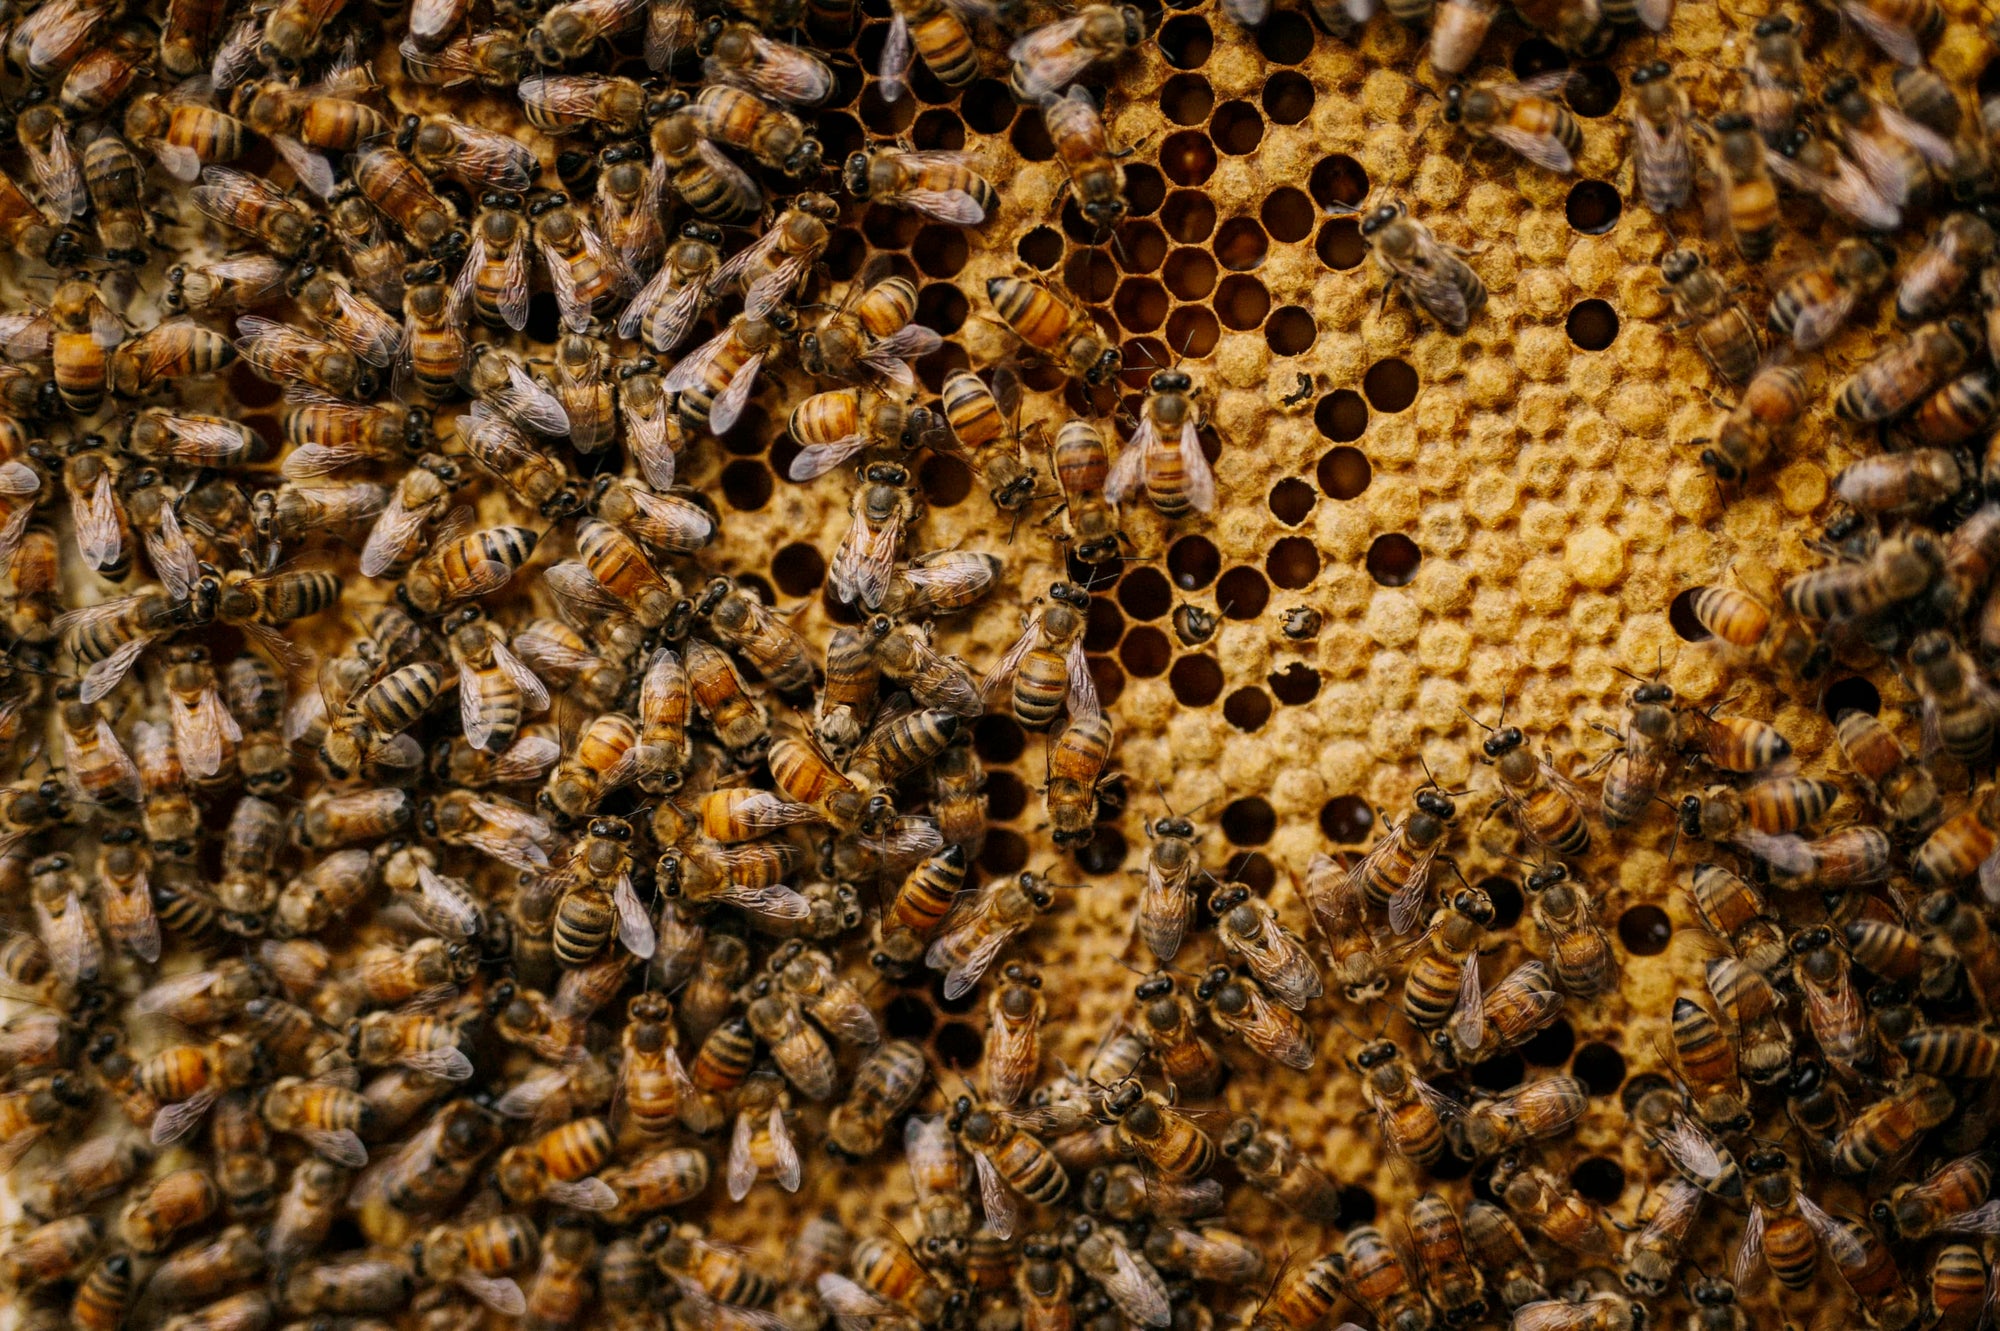 Hundreds of bees holding onto beehive